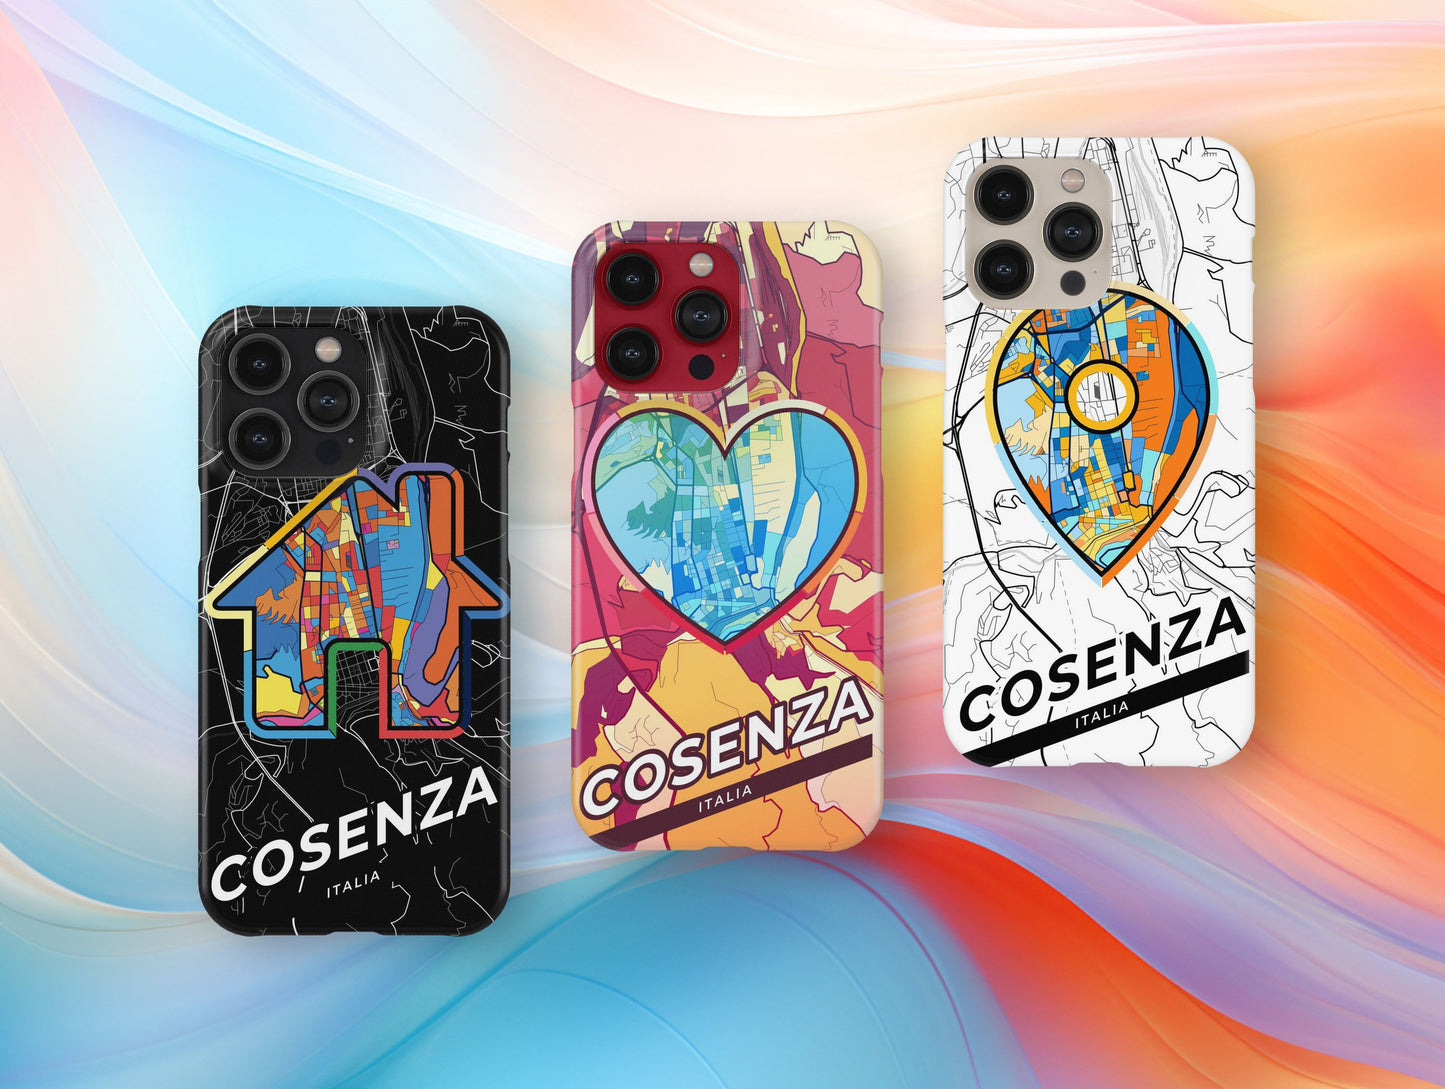 Cosenza Italy slim phone case with colorful icon. Birthday, wedding or housewarming gift. Couple match cases.